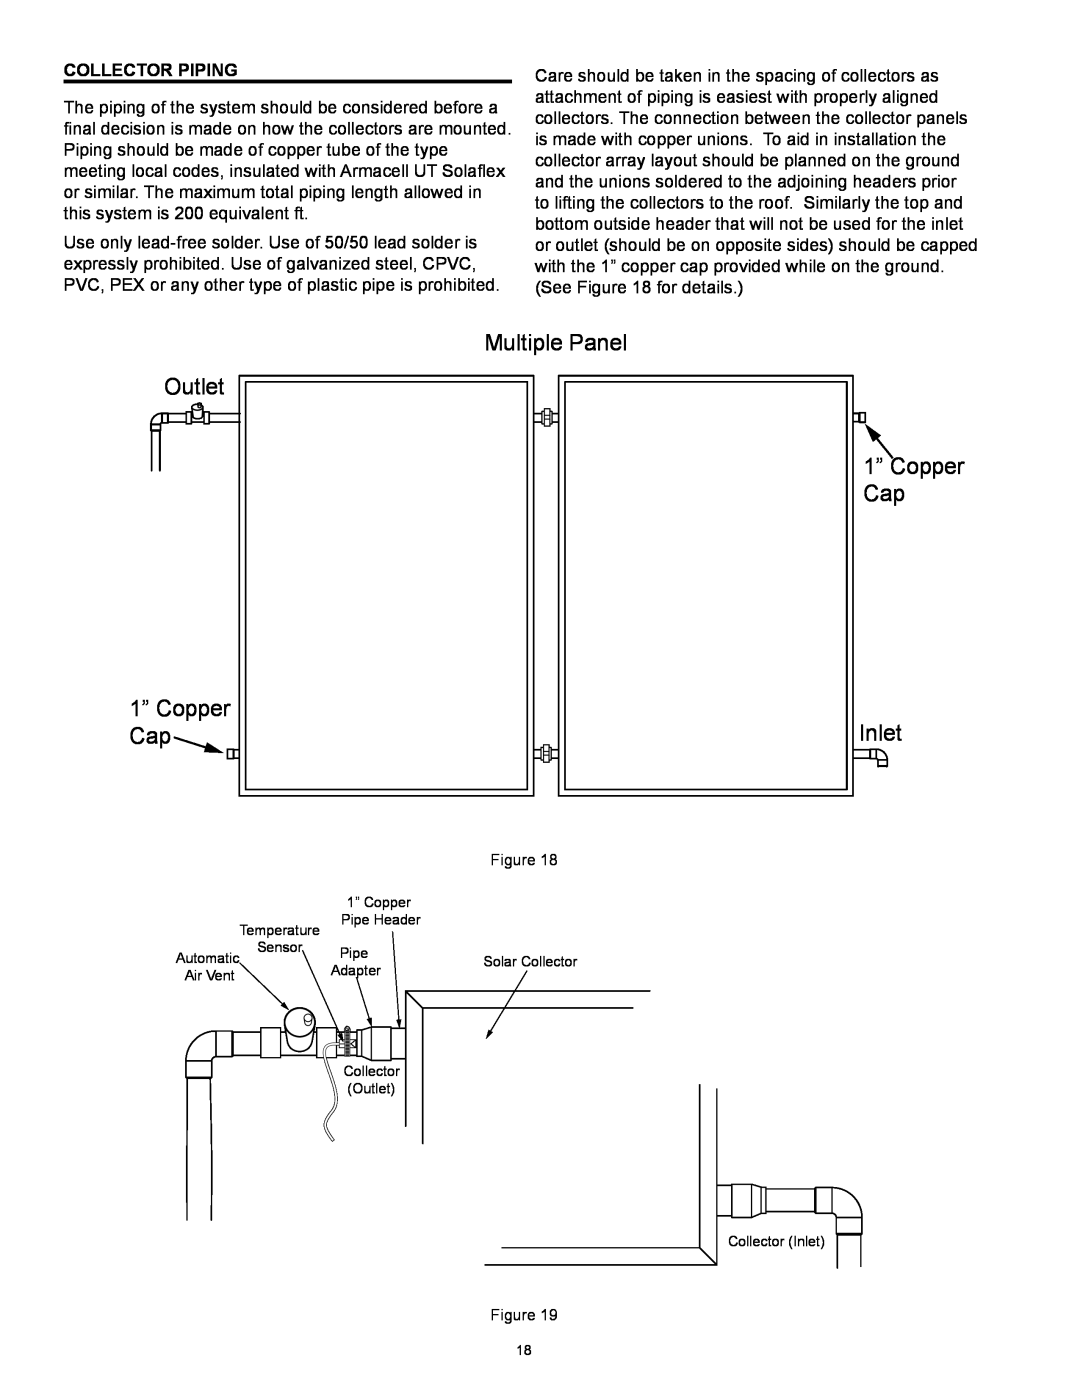 American Water Heater 318281-000 instruction manual Collector Piping, Multiple Panel, Outlet, 1” Copper Cap Inlet 